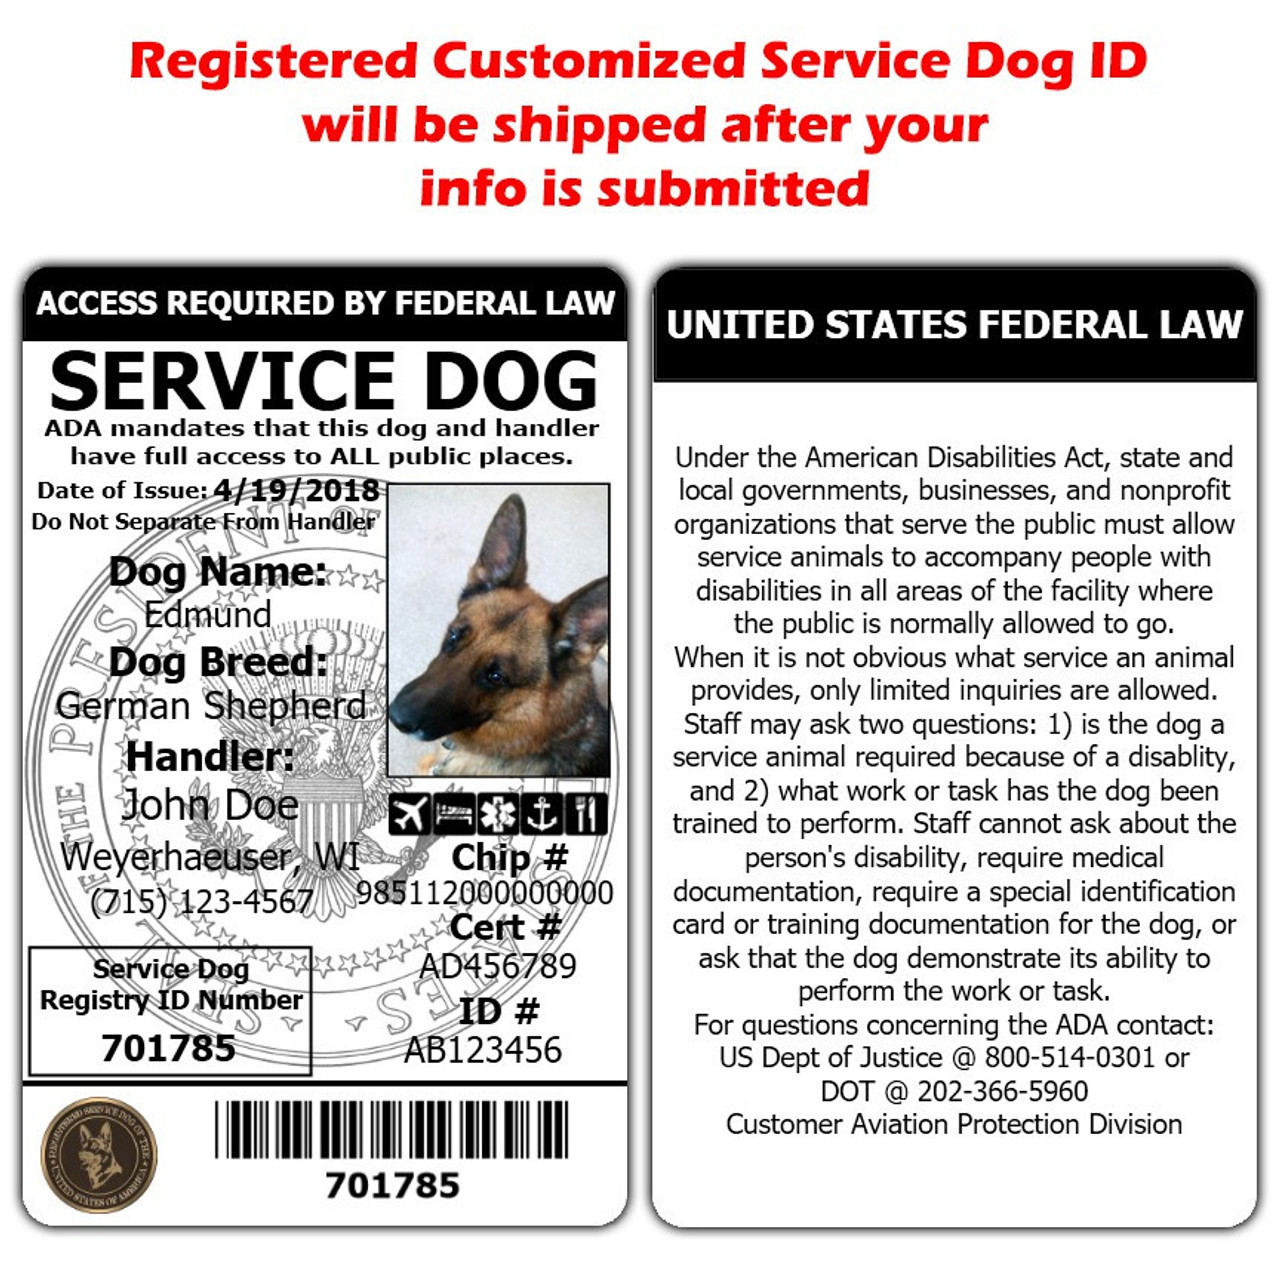 2pk Service Dog Photo ID Card + 2 Carriers + Free Registration + Digital Copy for Airline Travel